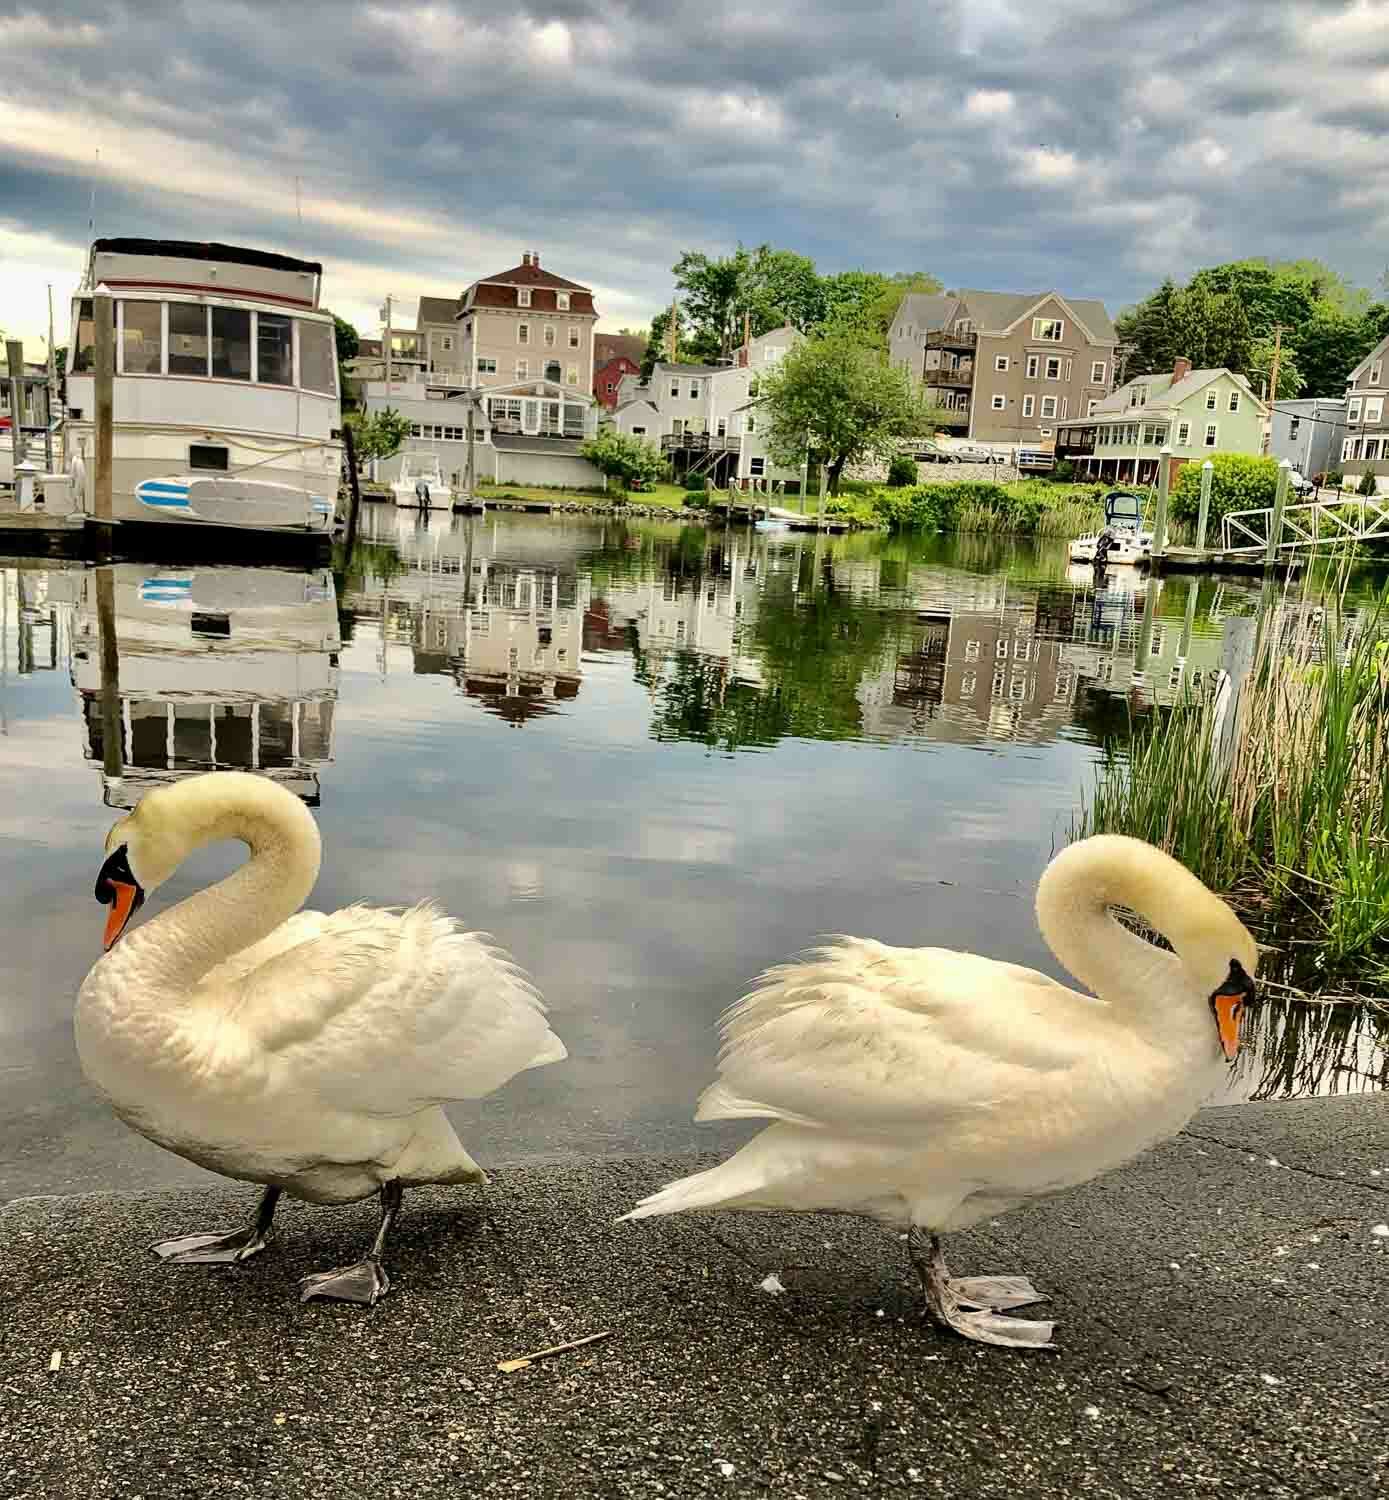 Photograph of Ducks in Rhode Island as part of the Traveling in Place photo exhibit